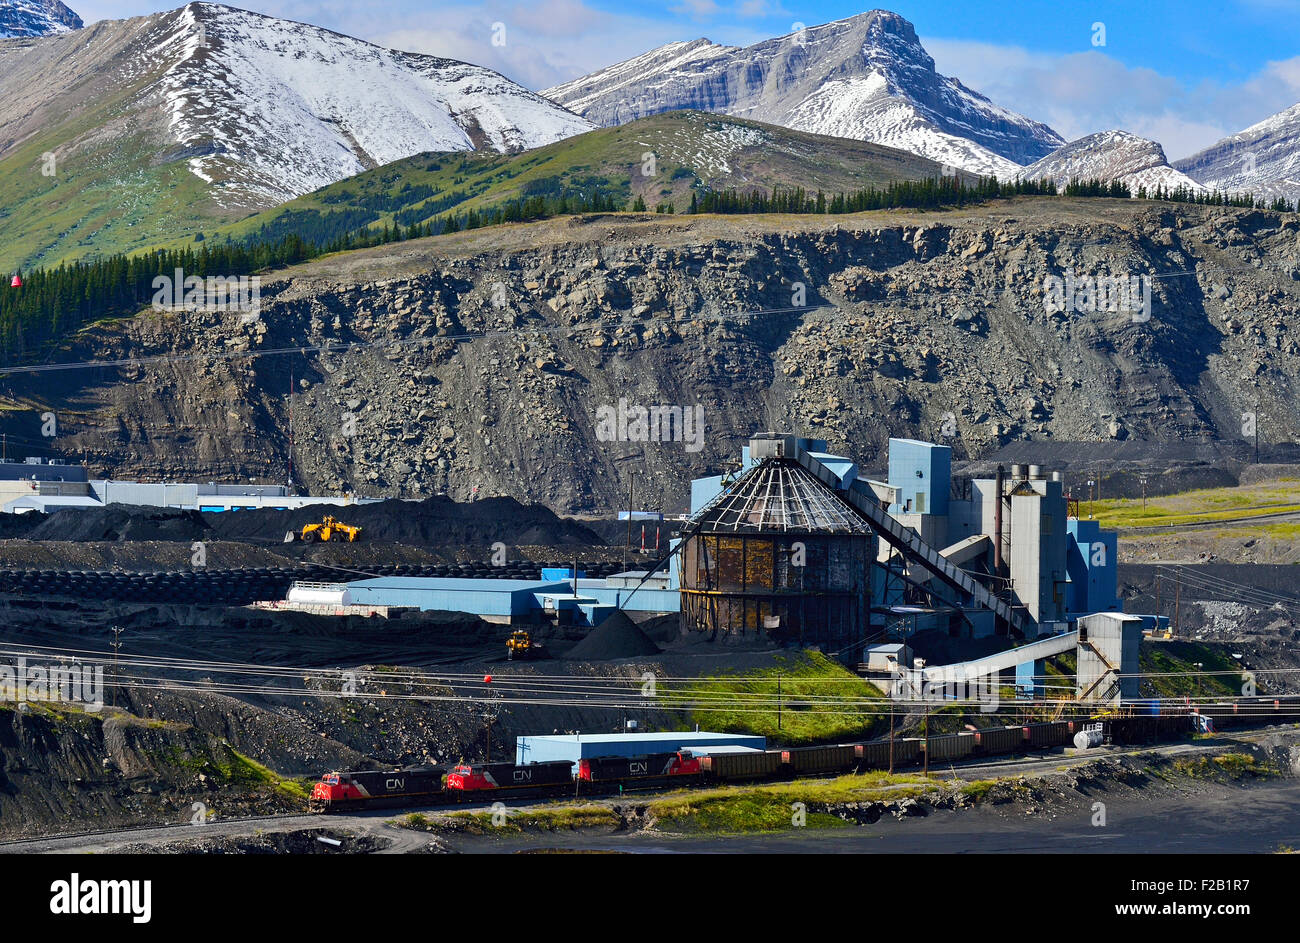 A landscape image of the Teck coal processing plant in the foothills of the rocky mountains near Cadomin Alberta, Stock Photo